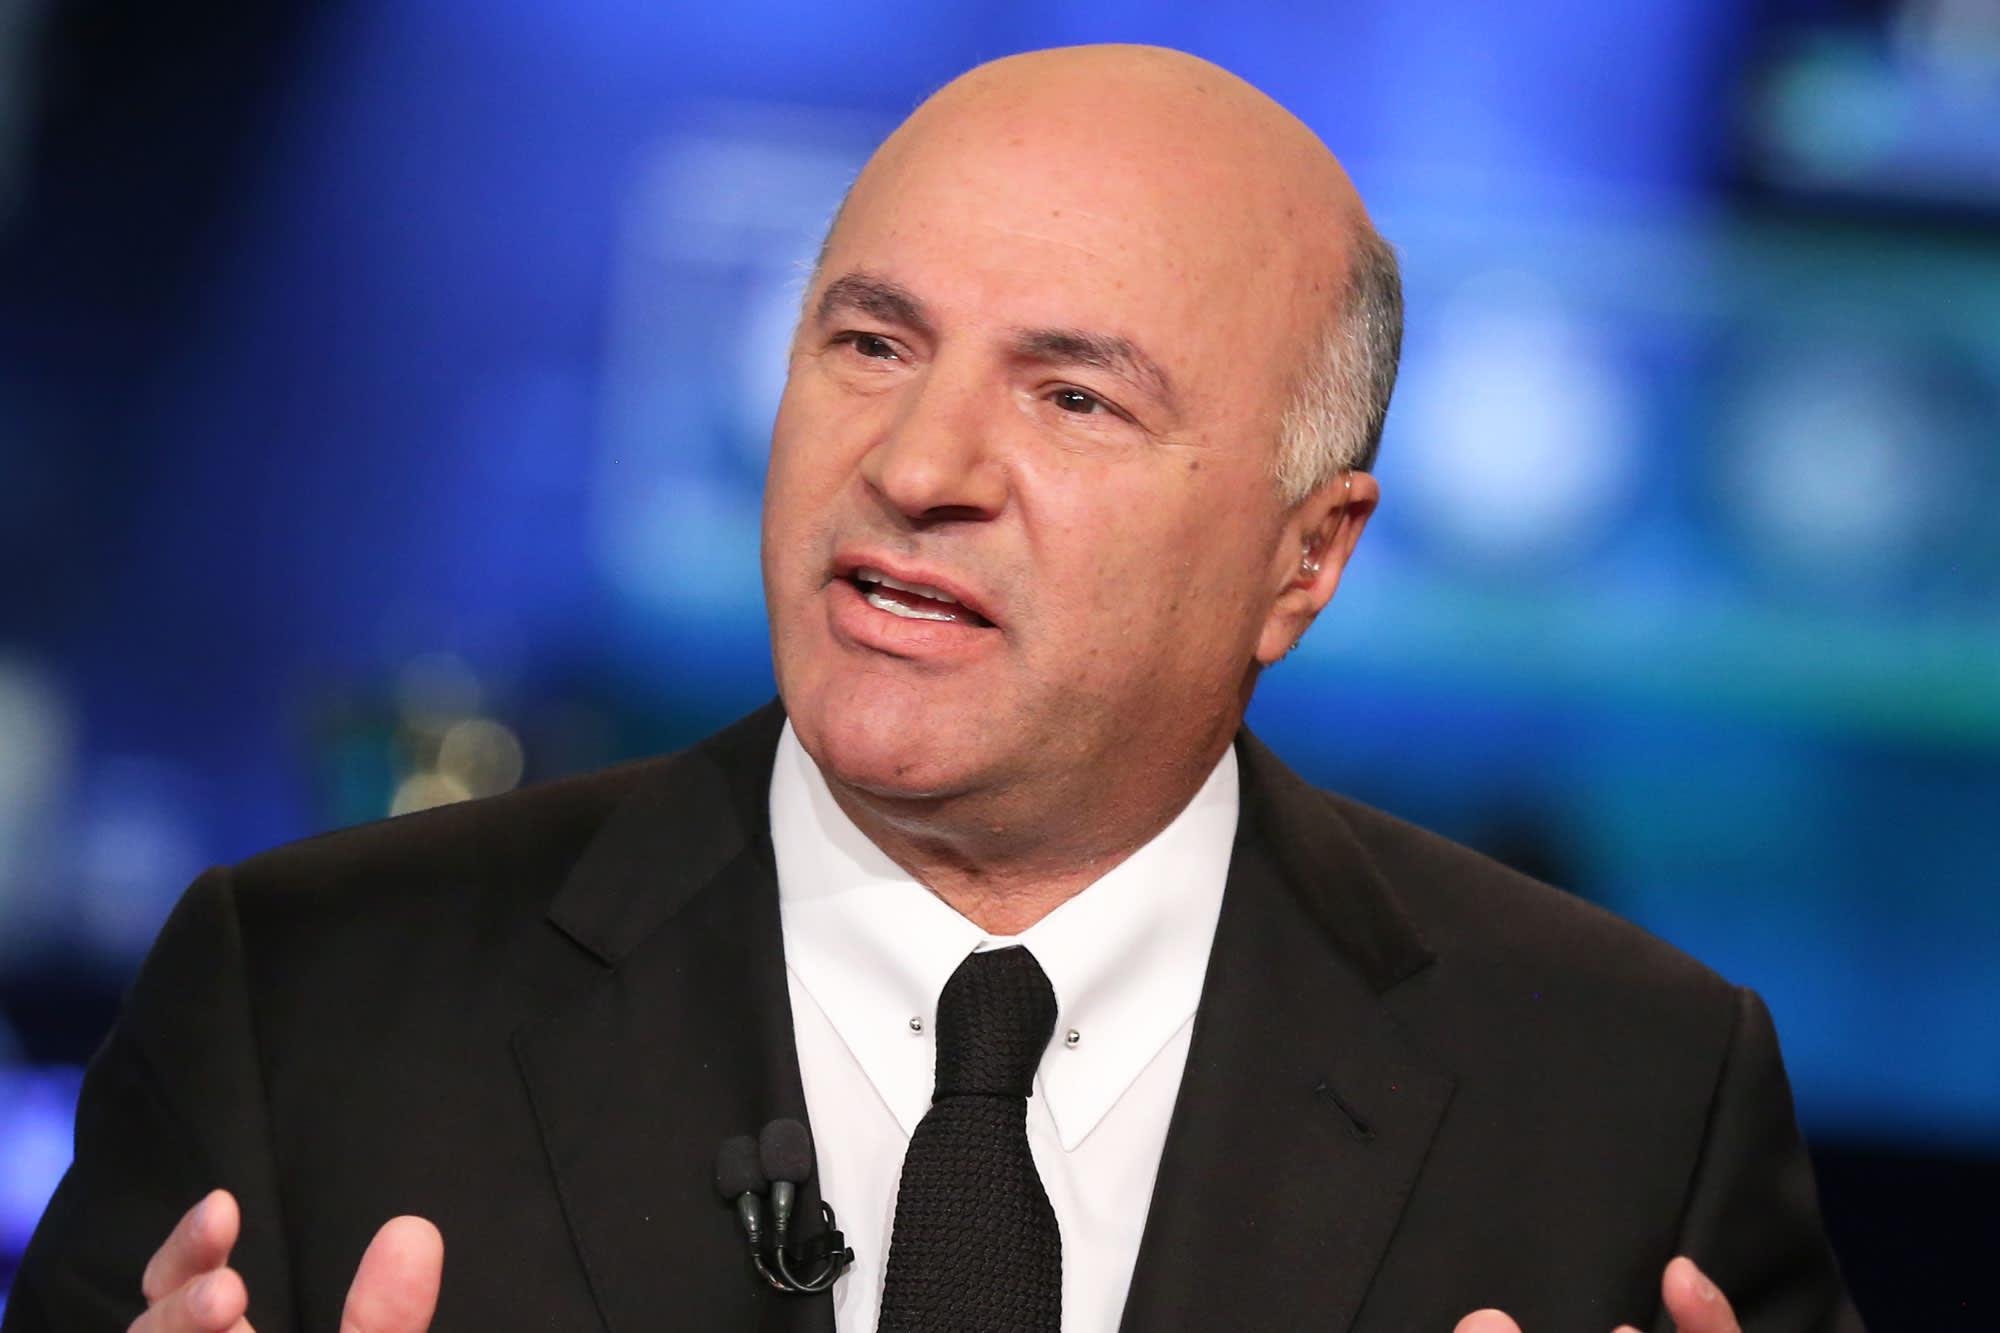 Kevin Oleary: O'Leary's political ambitions and investments show a wide range of interests.